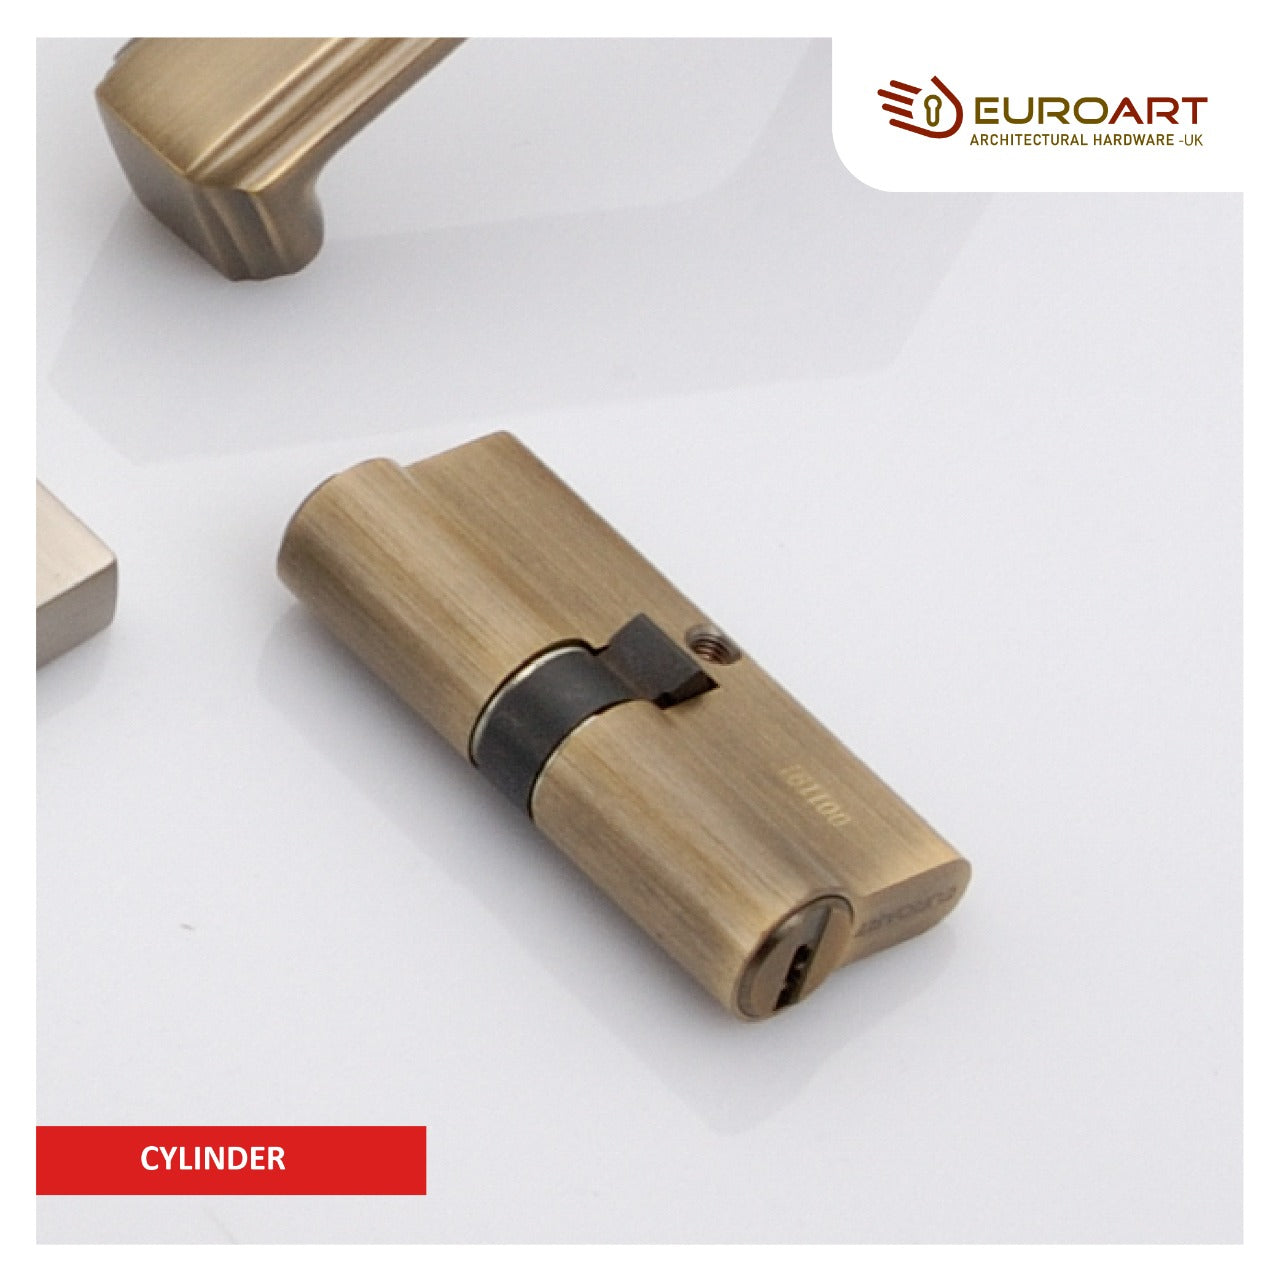 EuroArt Cylinder - High-quality and reliable door security solution by M. M. Noorbhoy & Co.